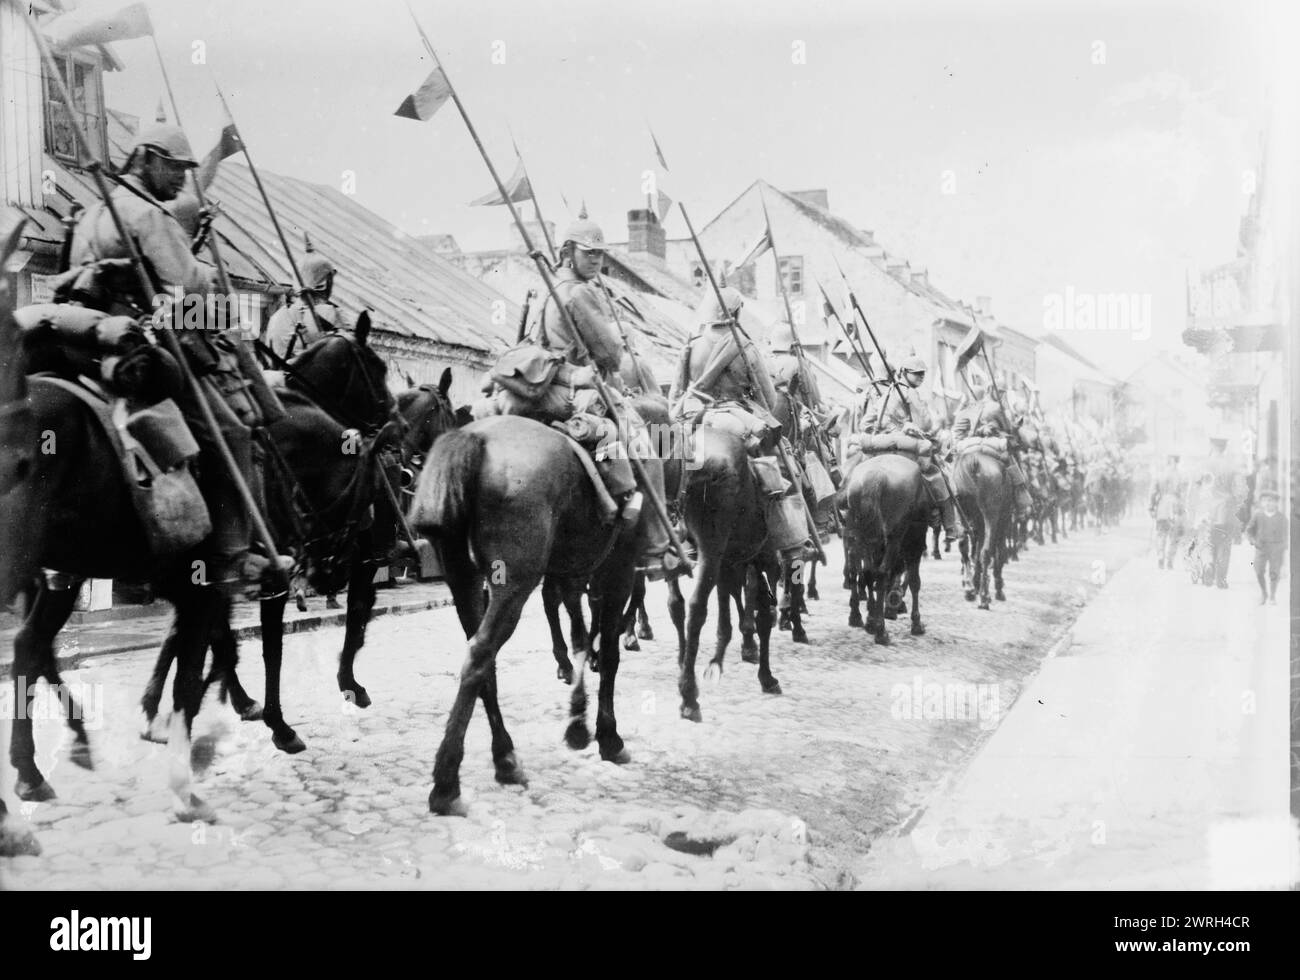 Germans in Lowicz, between 1914 and c1915. German soldiers on horseback in Lowicz, Poland during World War I. Stock Photo